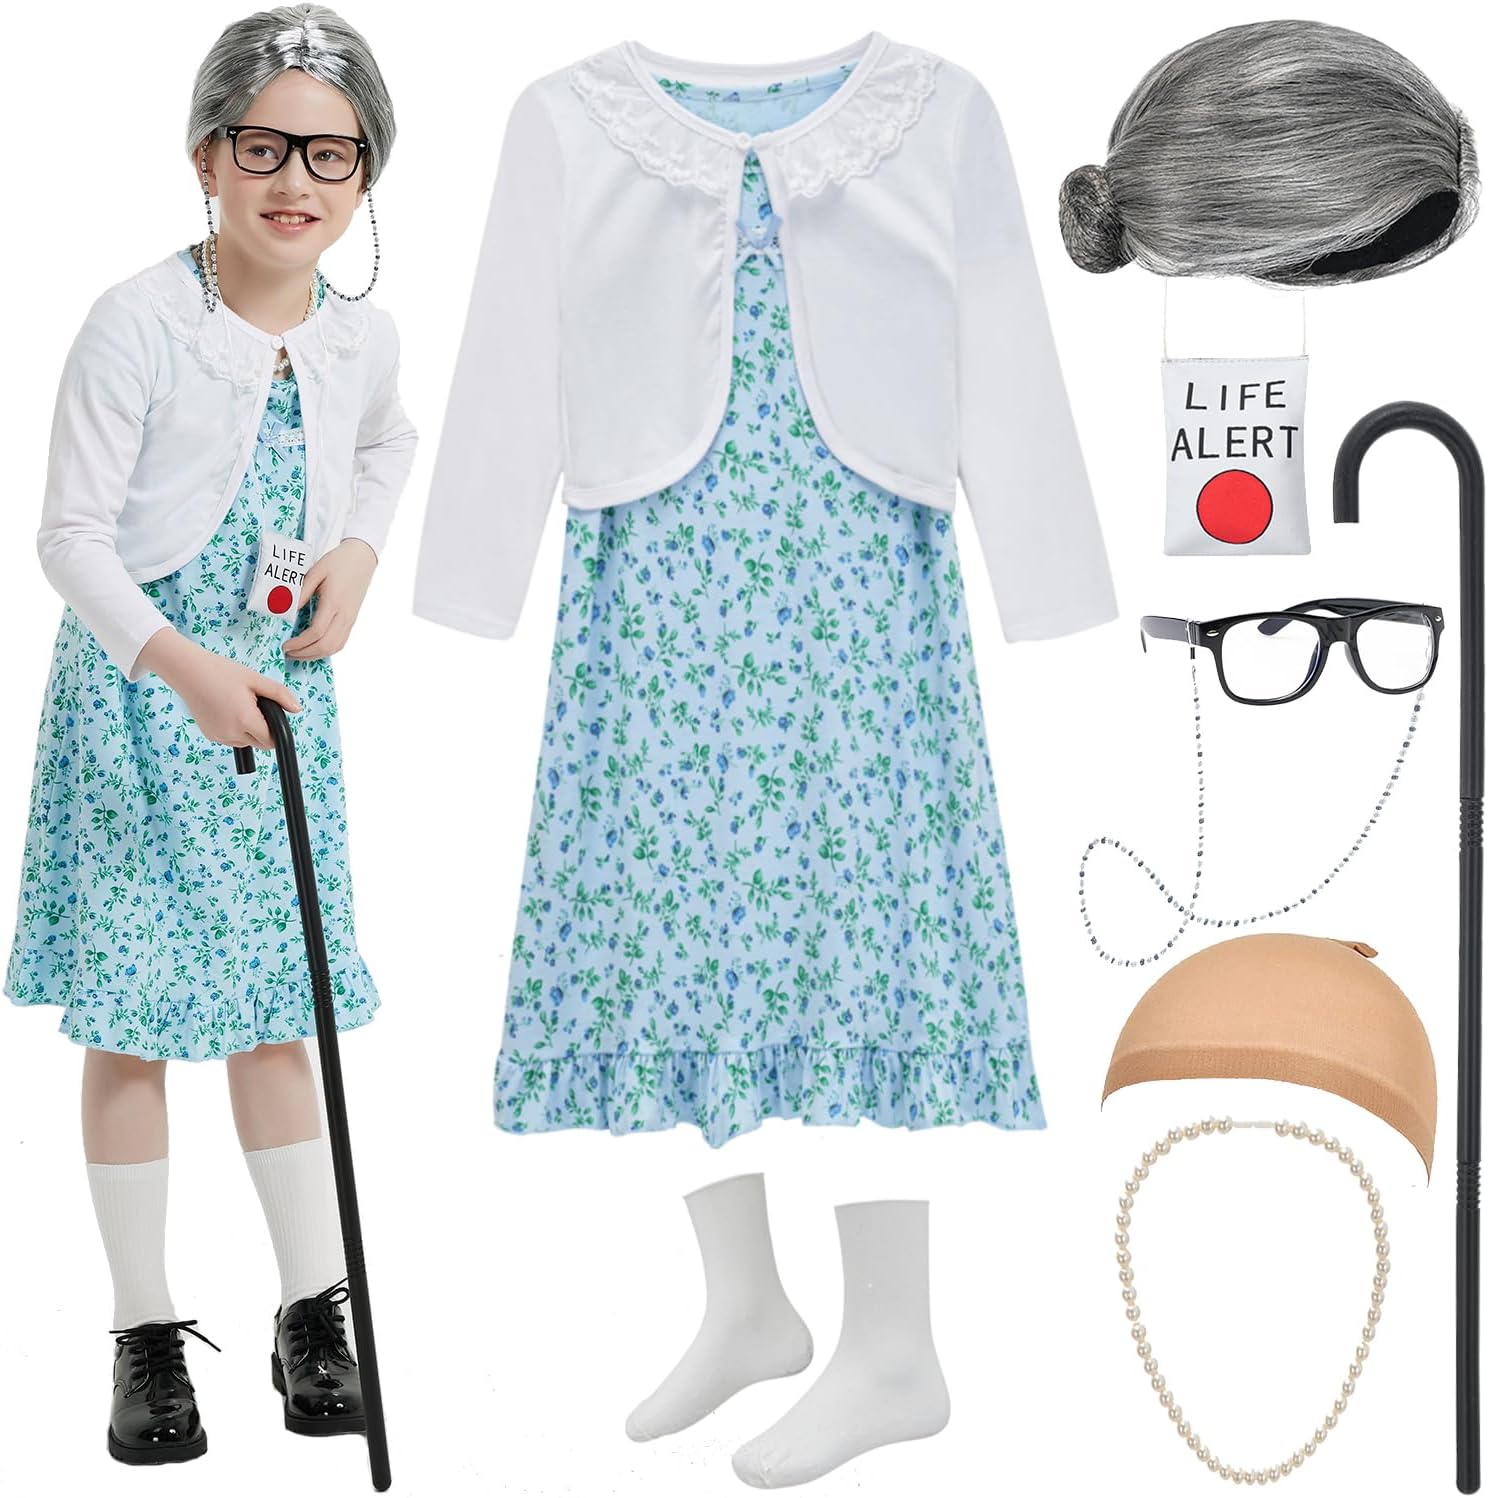 Old Lady Costume for Girls 100th Day of School Costume Grandma Granny Dress